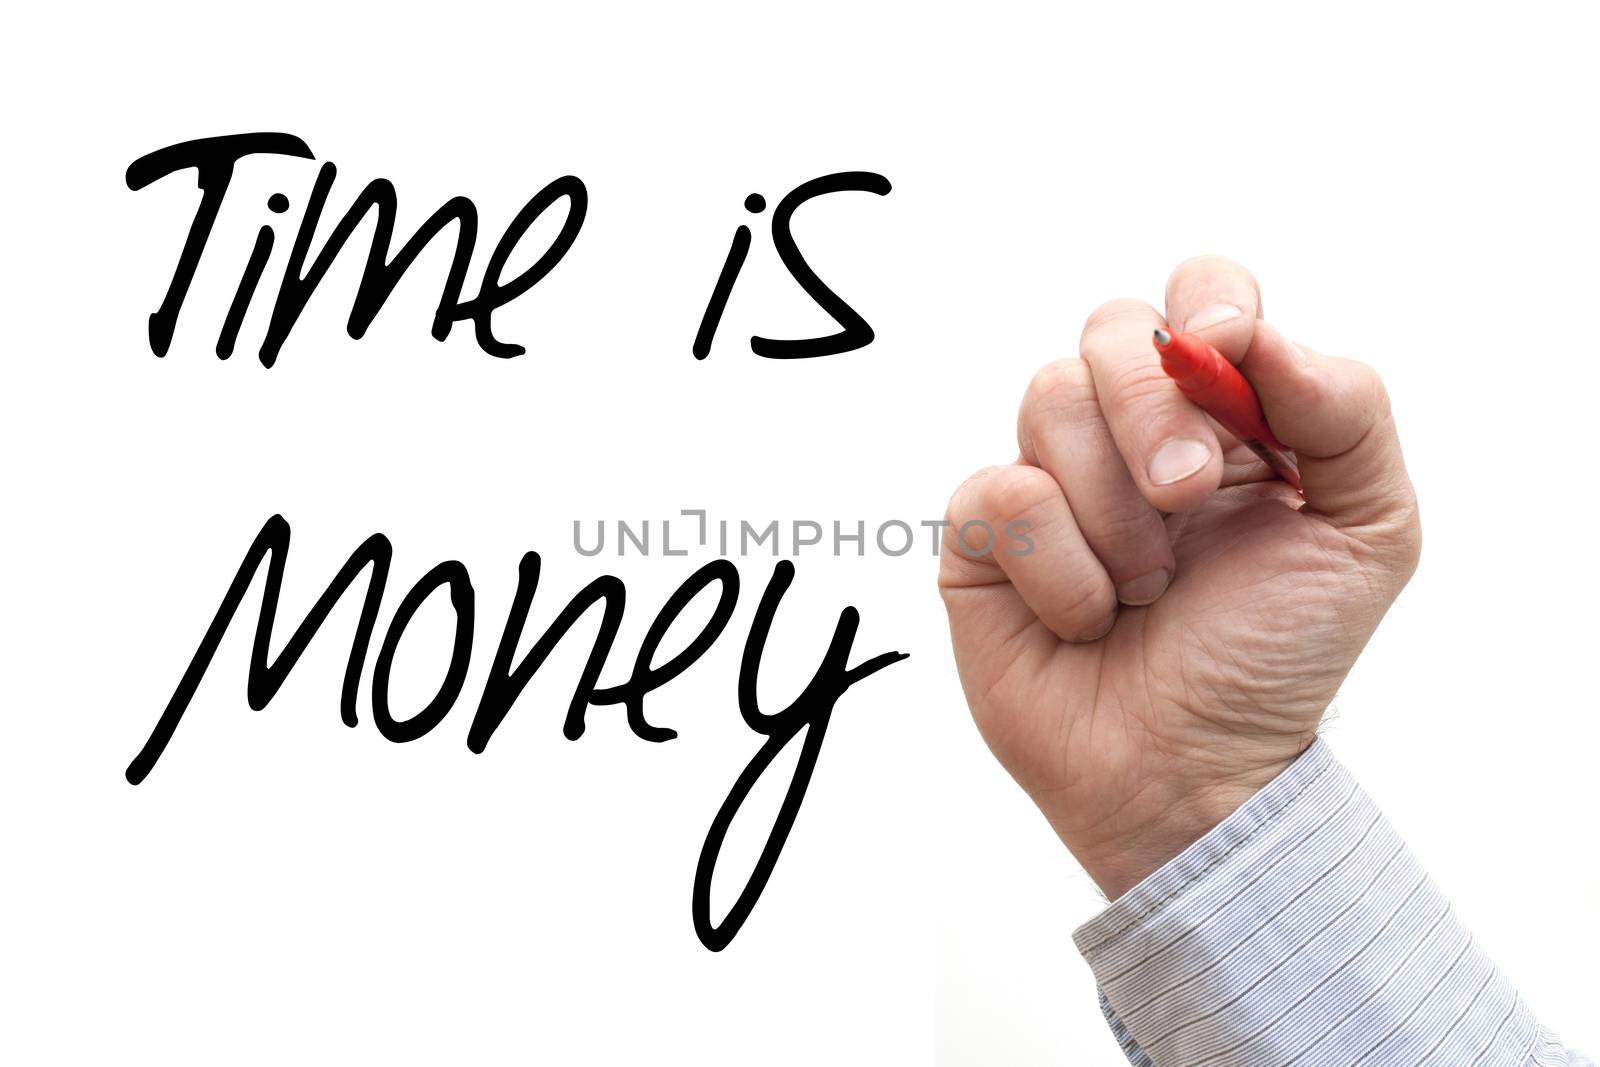 A Photo / Illustration of a Hand Writing 'Time is Money'